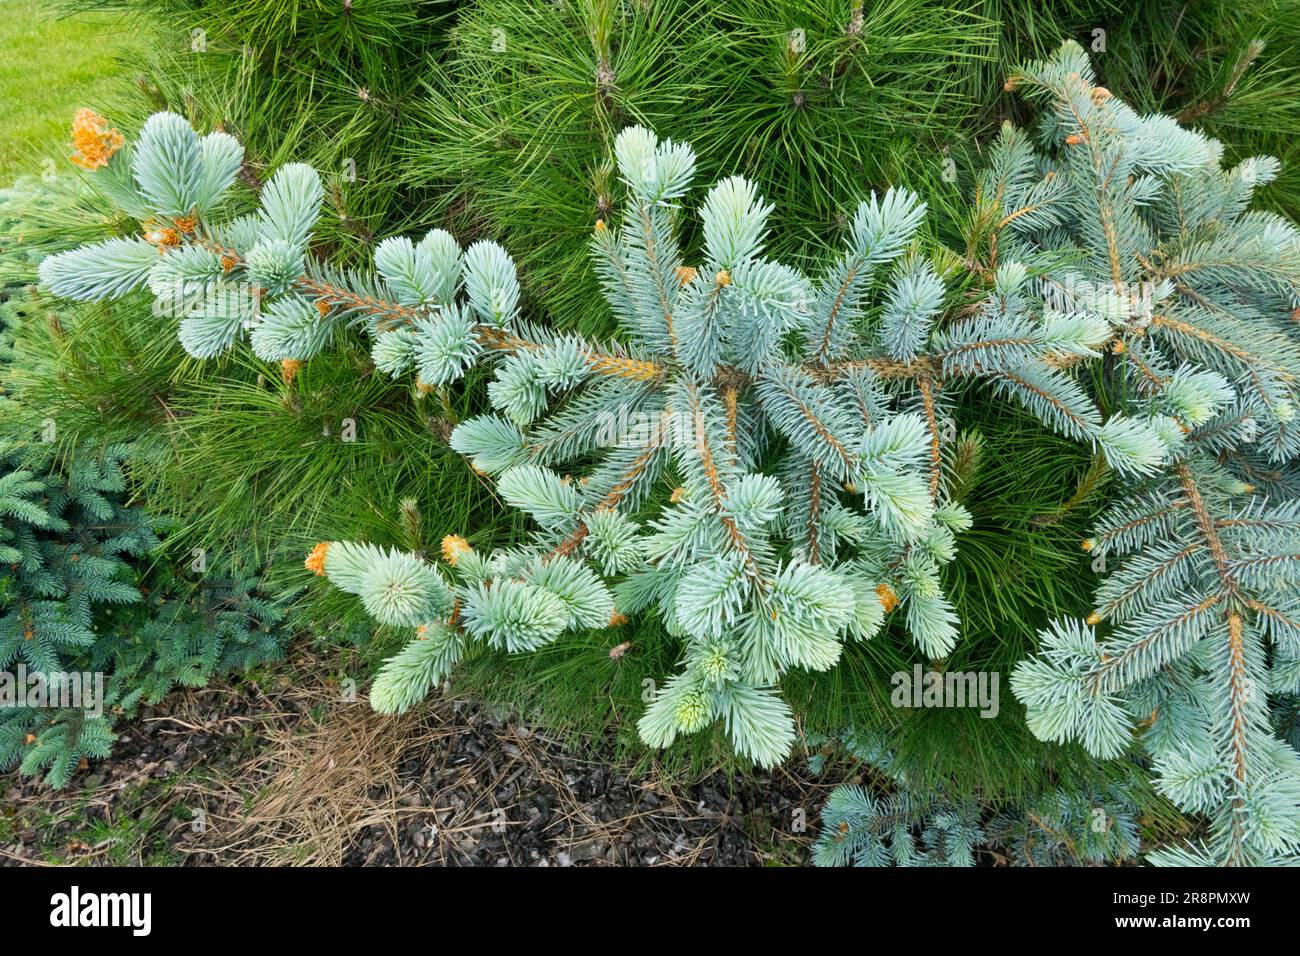 Prostrate Silver Spruce Picea pungens 'Procumbens Glauca' Picea pungens Colorado Blue Spruce Tree Spring Silver Colour background Pinus nigra 'Nana' Stock Photo